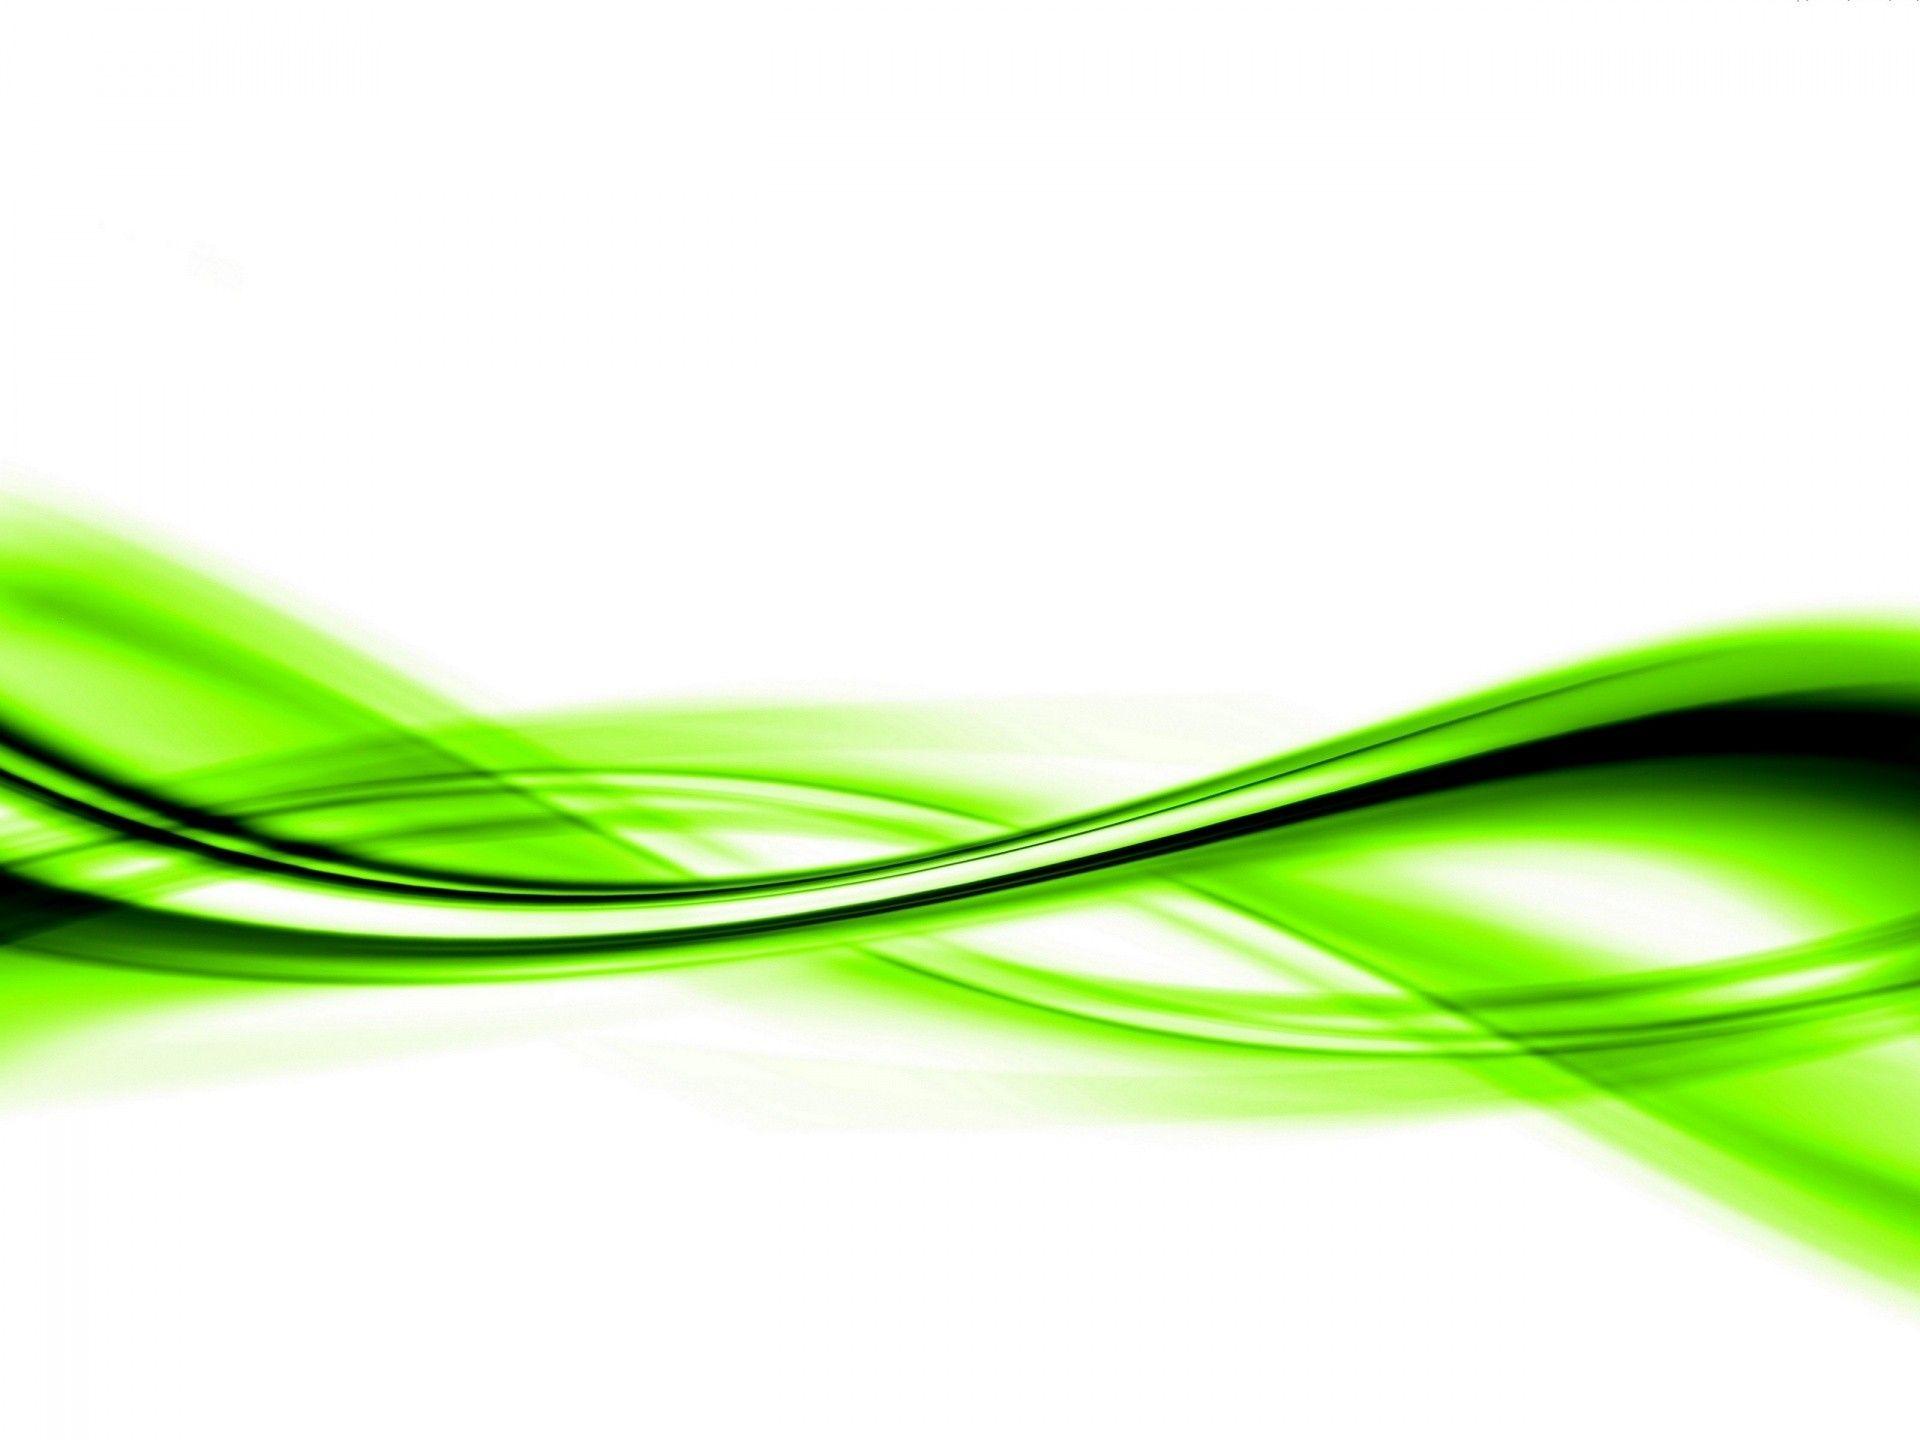 Wallpaper.wiki Cool Abstract Green 1920x1440 PIC WPC0014451